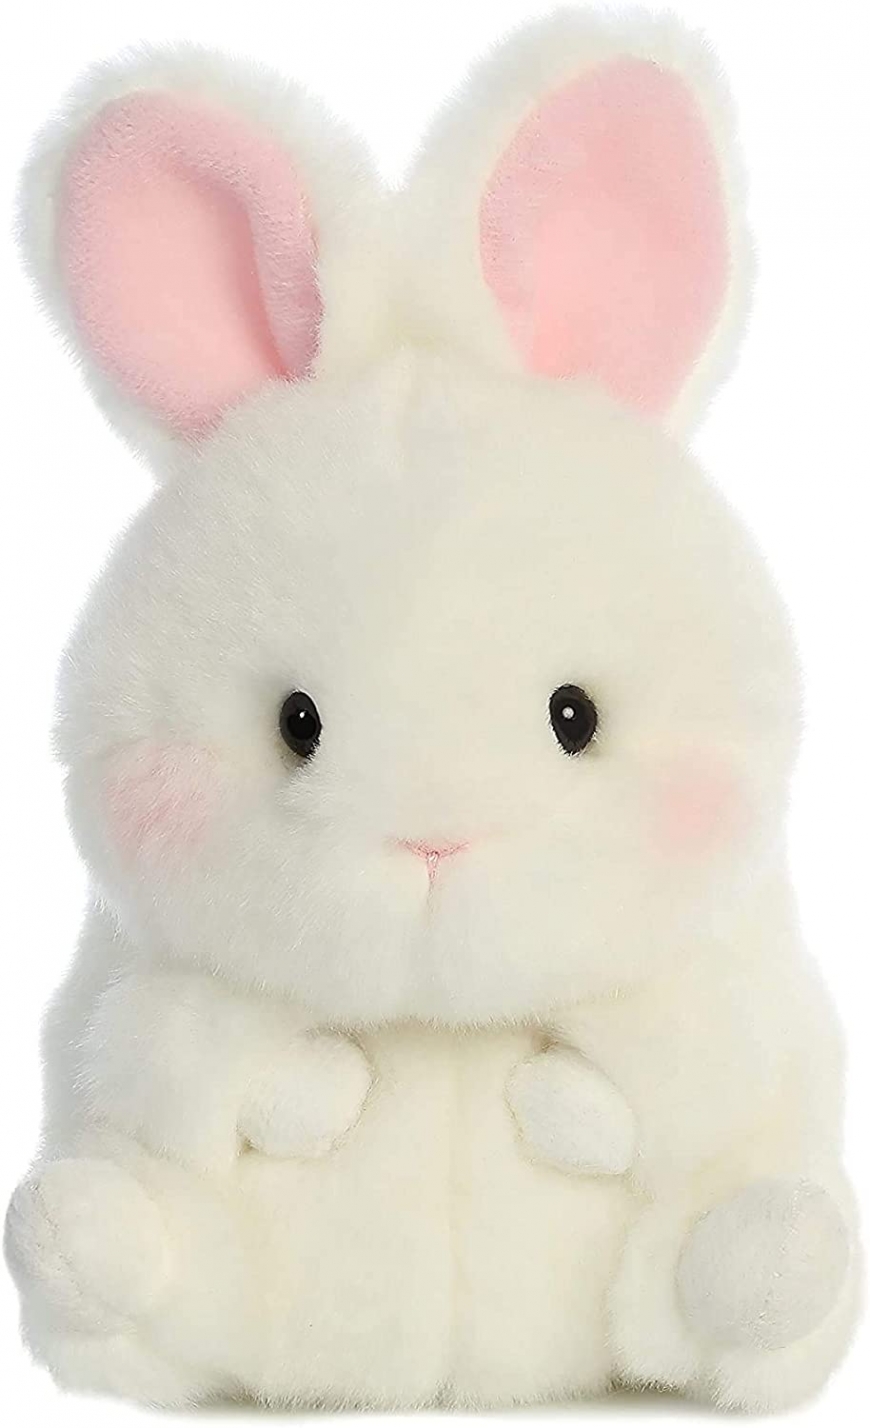 Adorable bunny toy for Easter